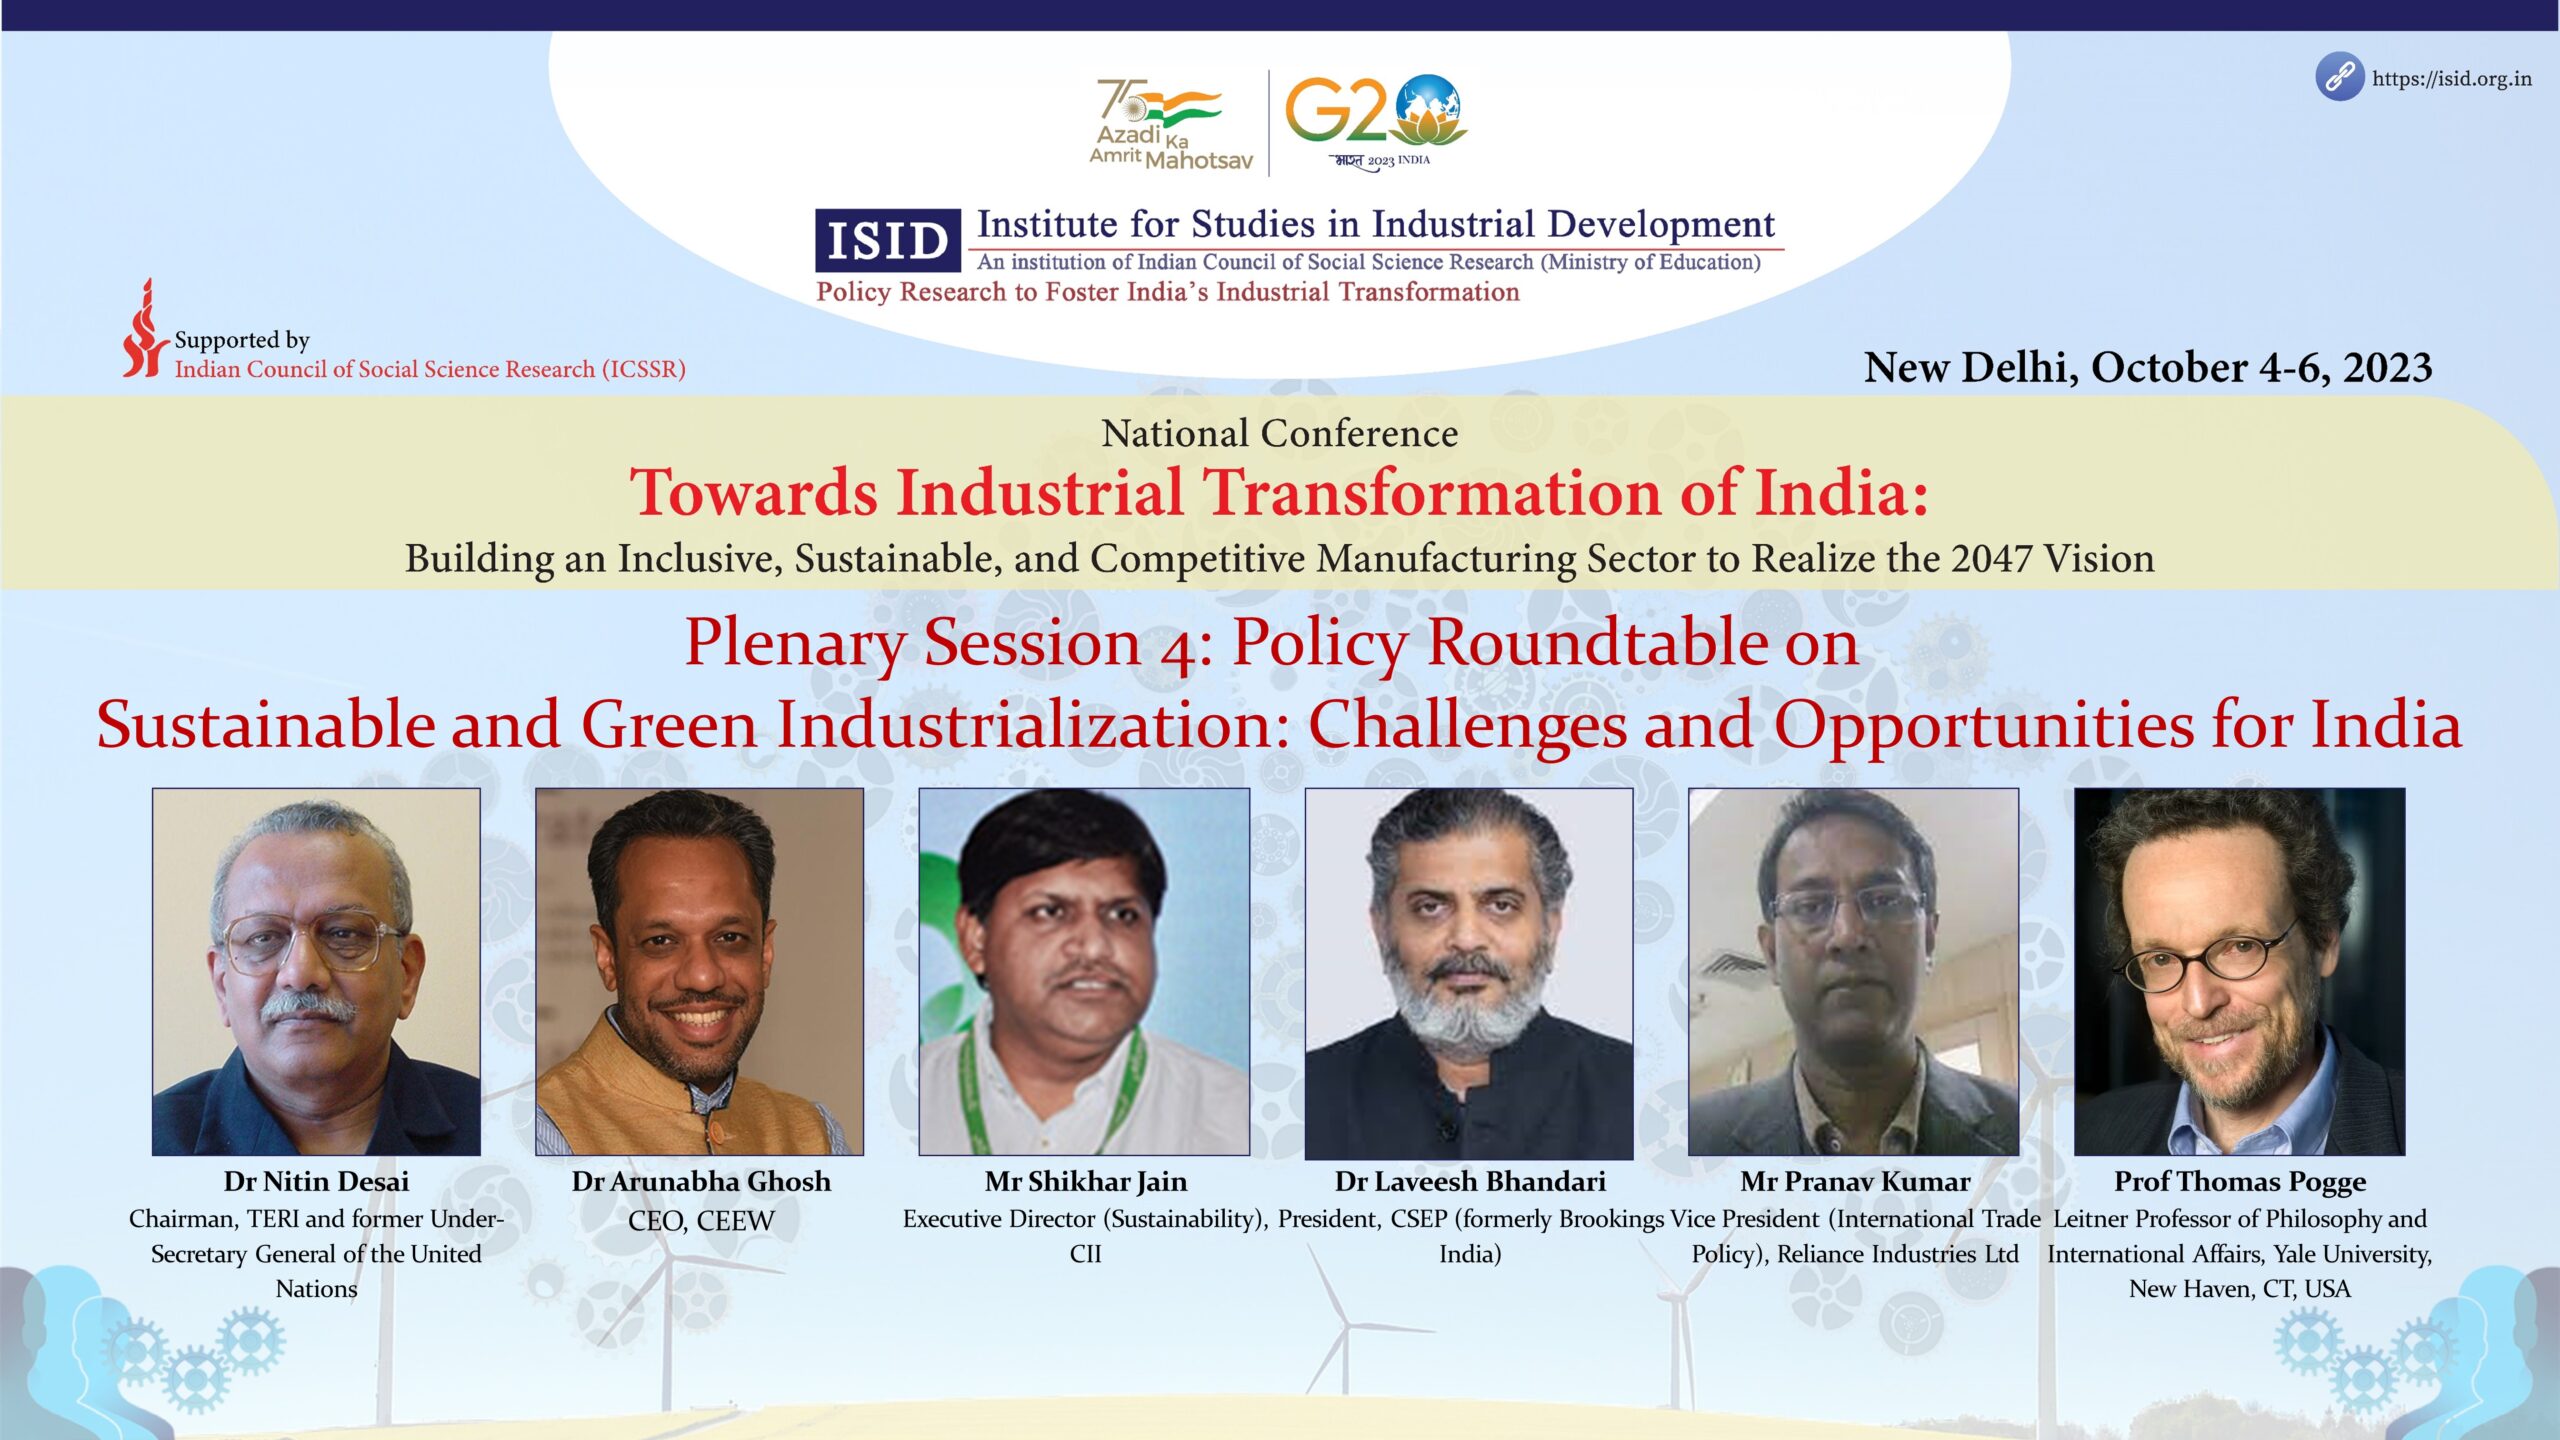 Policy Roundtable on Sustainable and Green Industrialization: Challenges and Opportunities for India